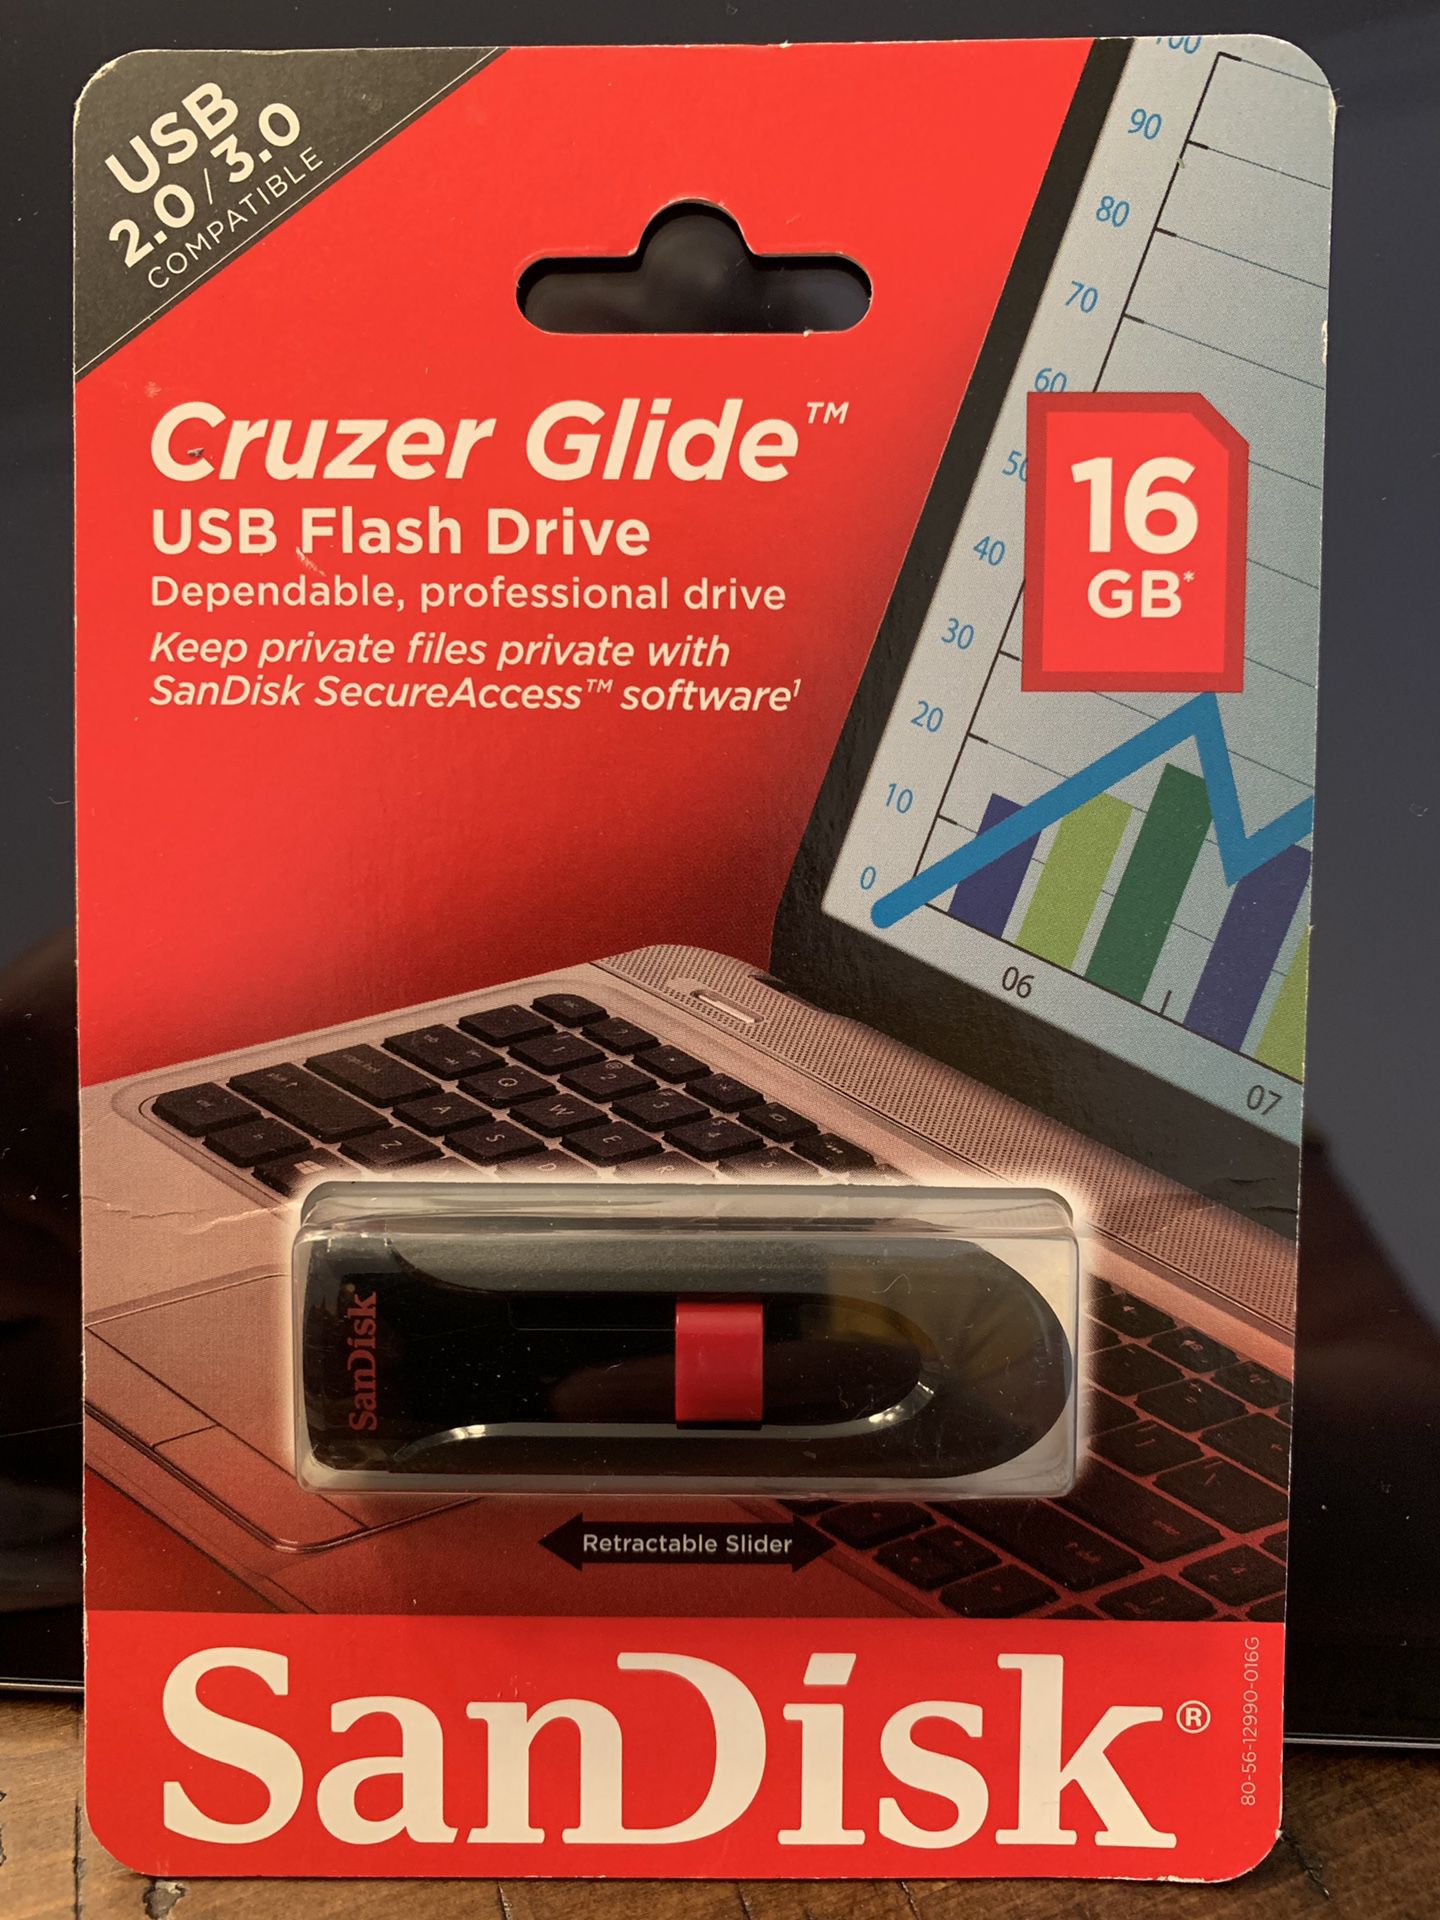 New Flash drive still in package